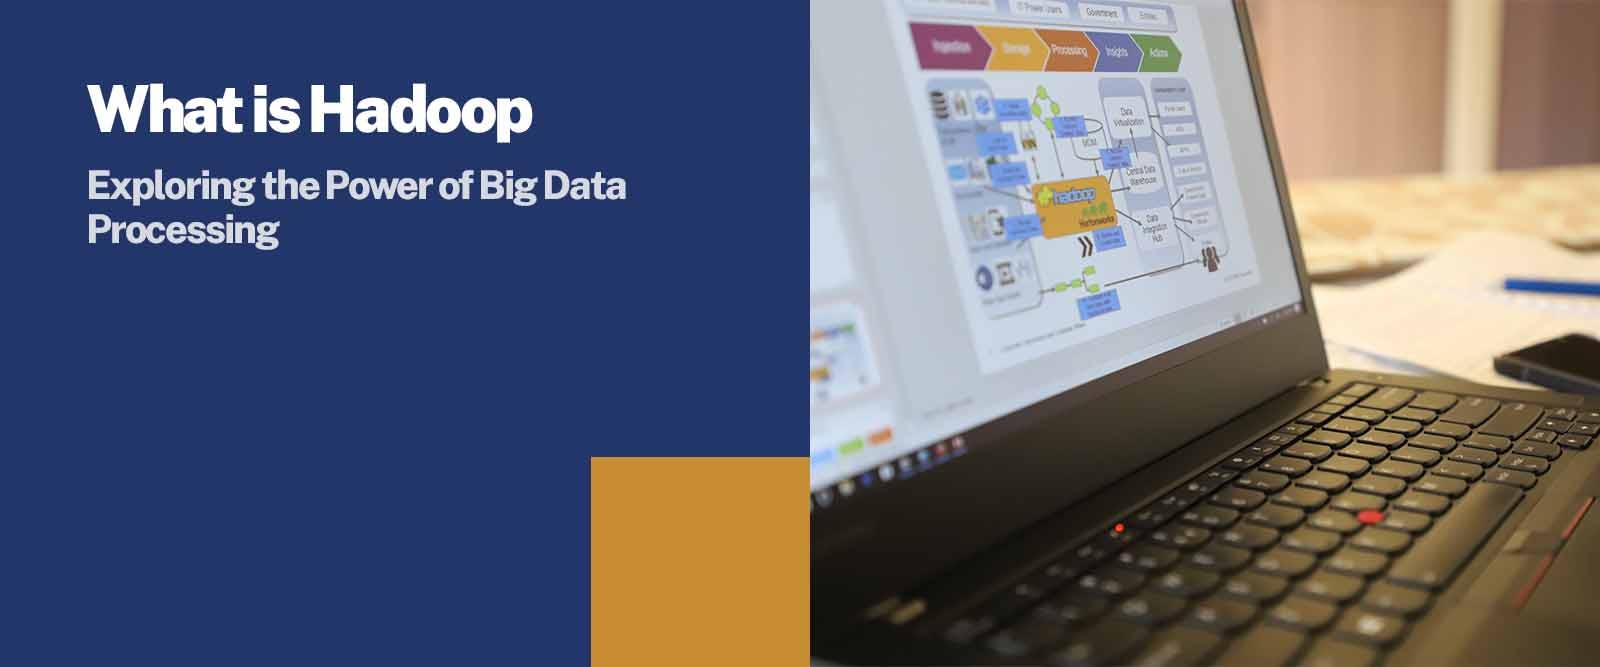 What is Hadoop Exploring the Power of Big Data Processing